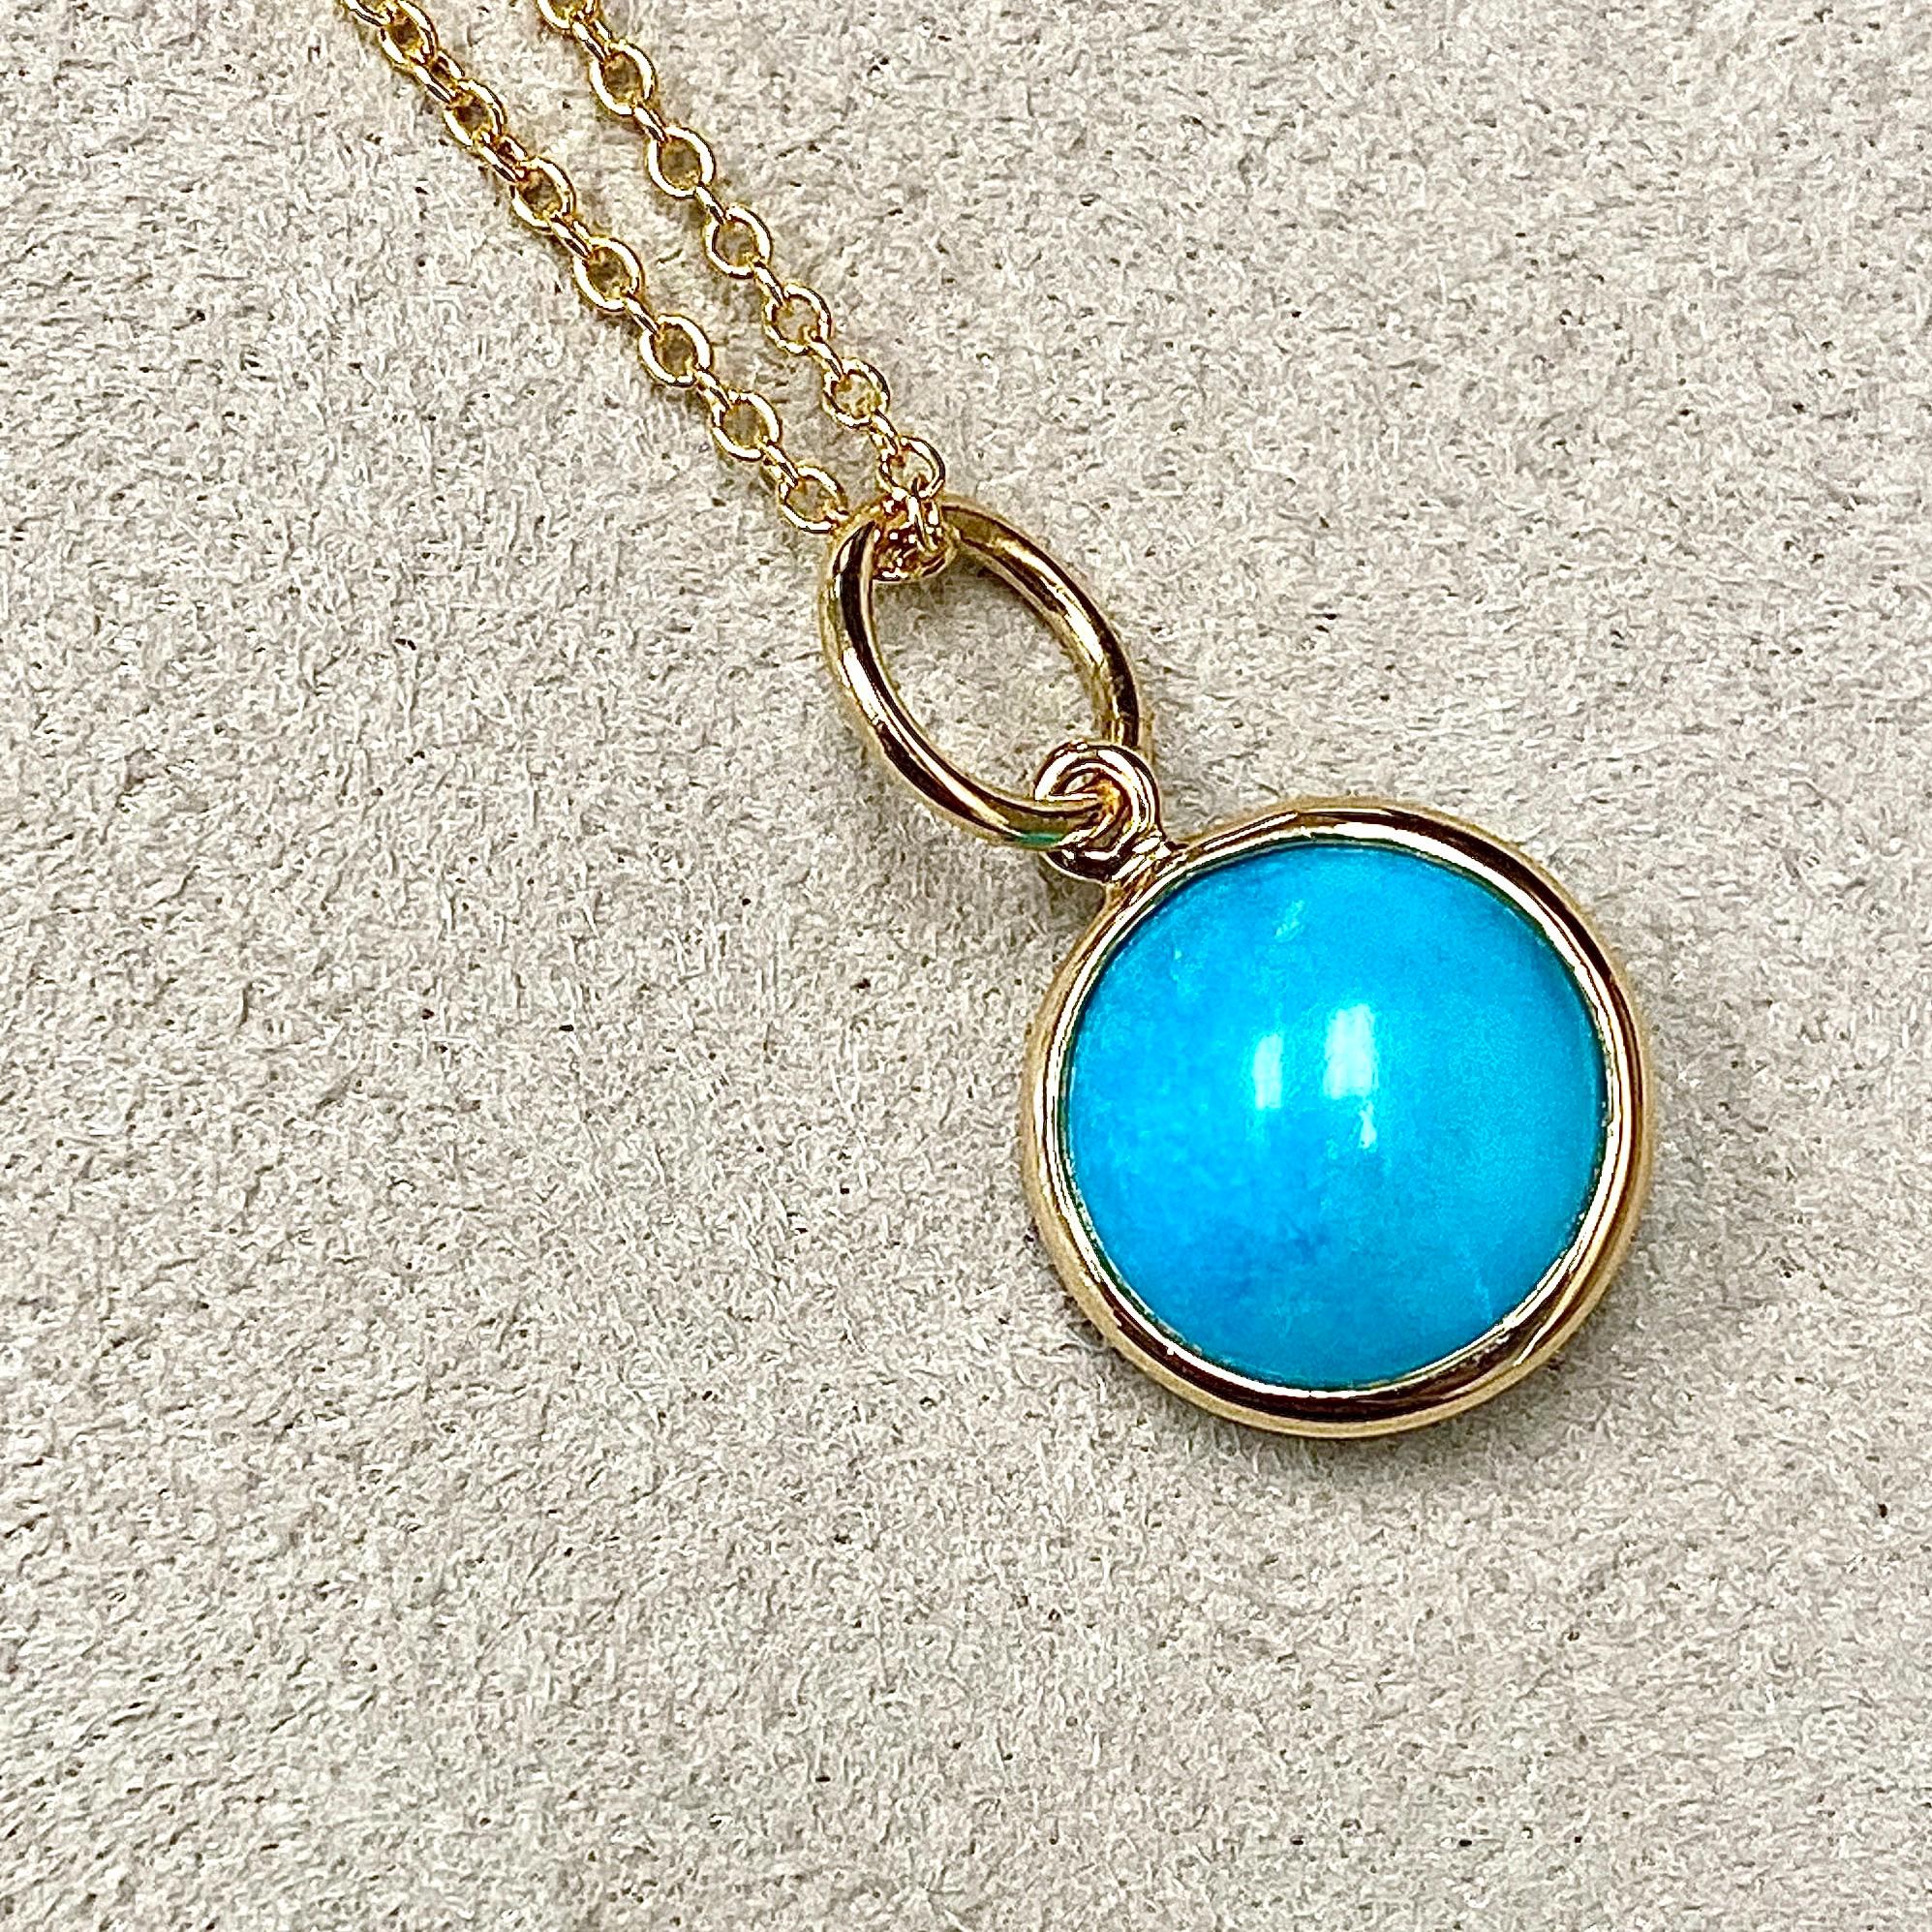 Created in 18 karat yellow gold
10 mm size charm
Sleeping Beauty Turquoise 3.5 cts approx
December Birthstone
Chain sold separately 

Exquisitely crafted in 18 karat yellow gold, this 10 mm charm-pendant is adorned with the opulent beauty of 3.5 cts